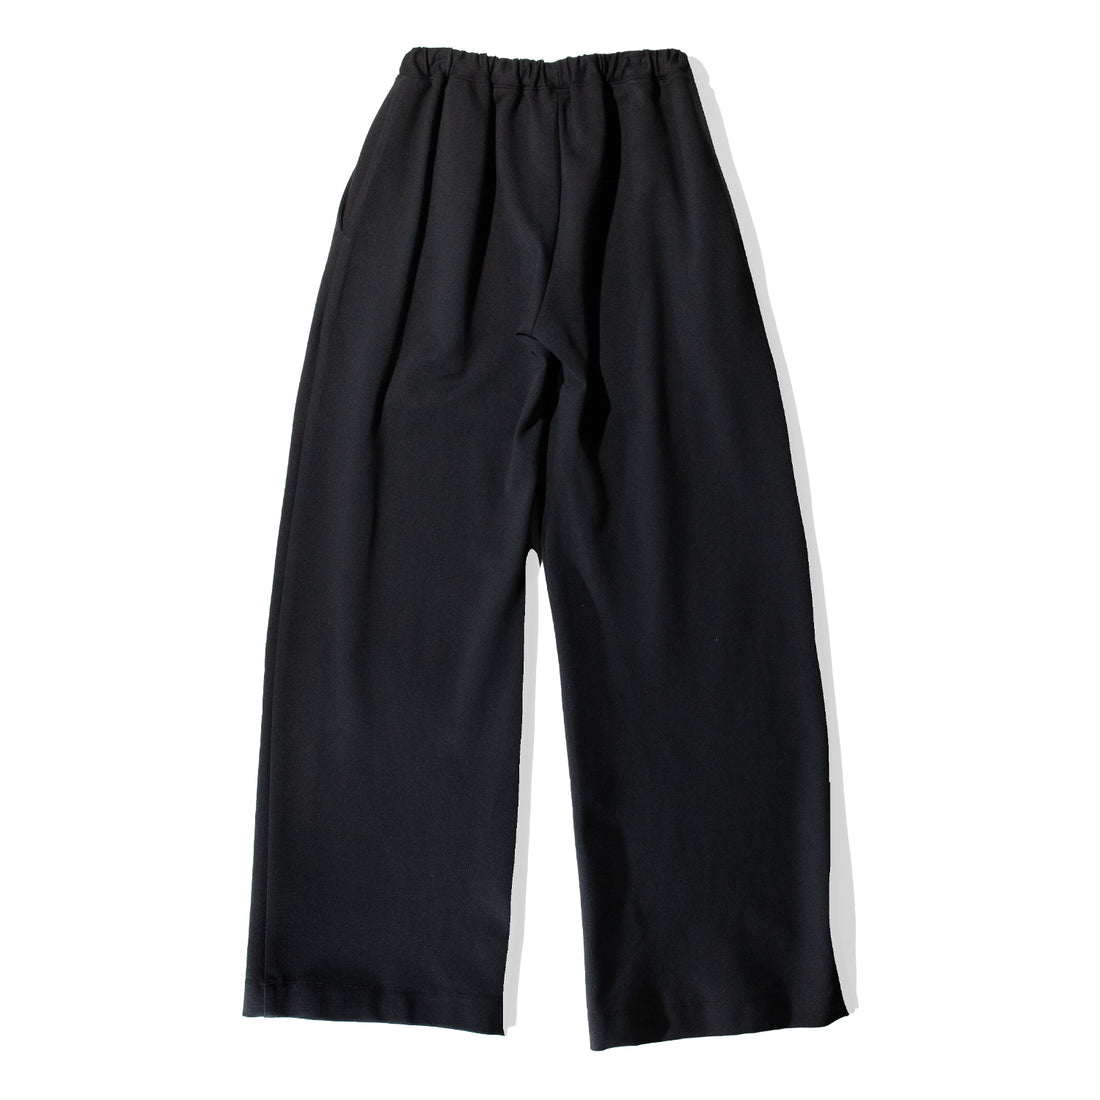 Grei Memory Knit Easy Pant in Charcoal